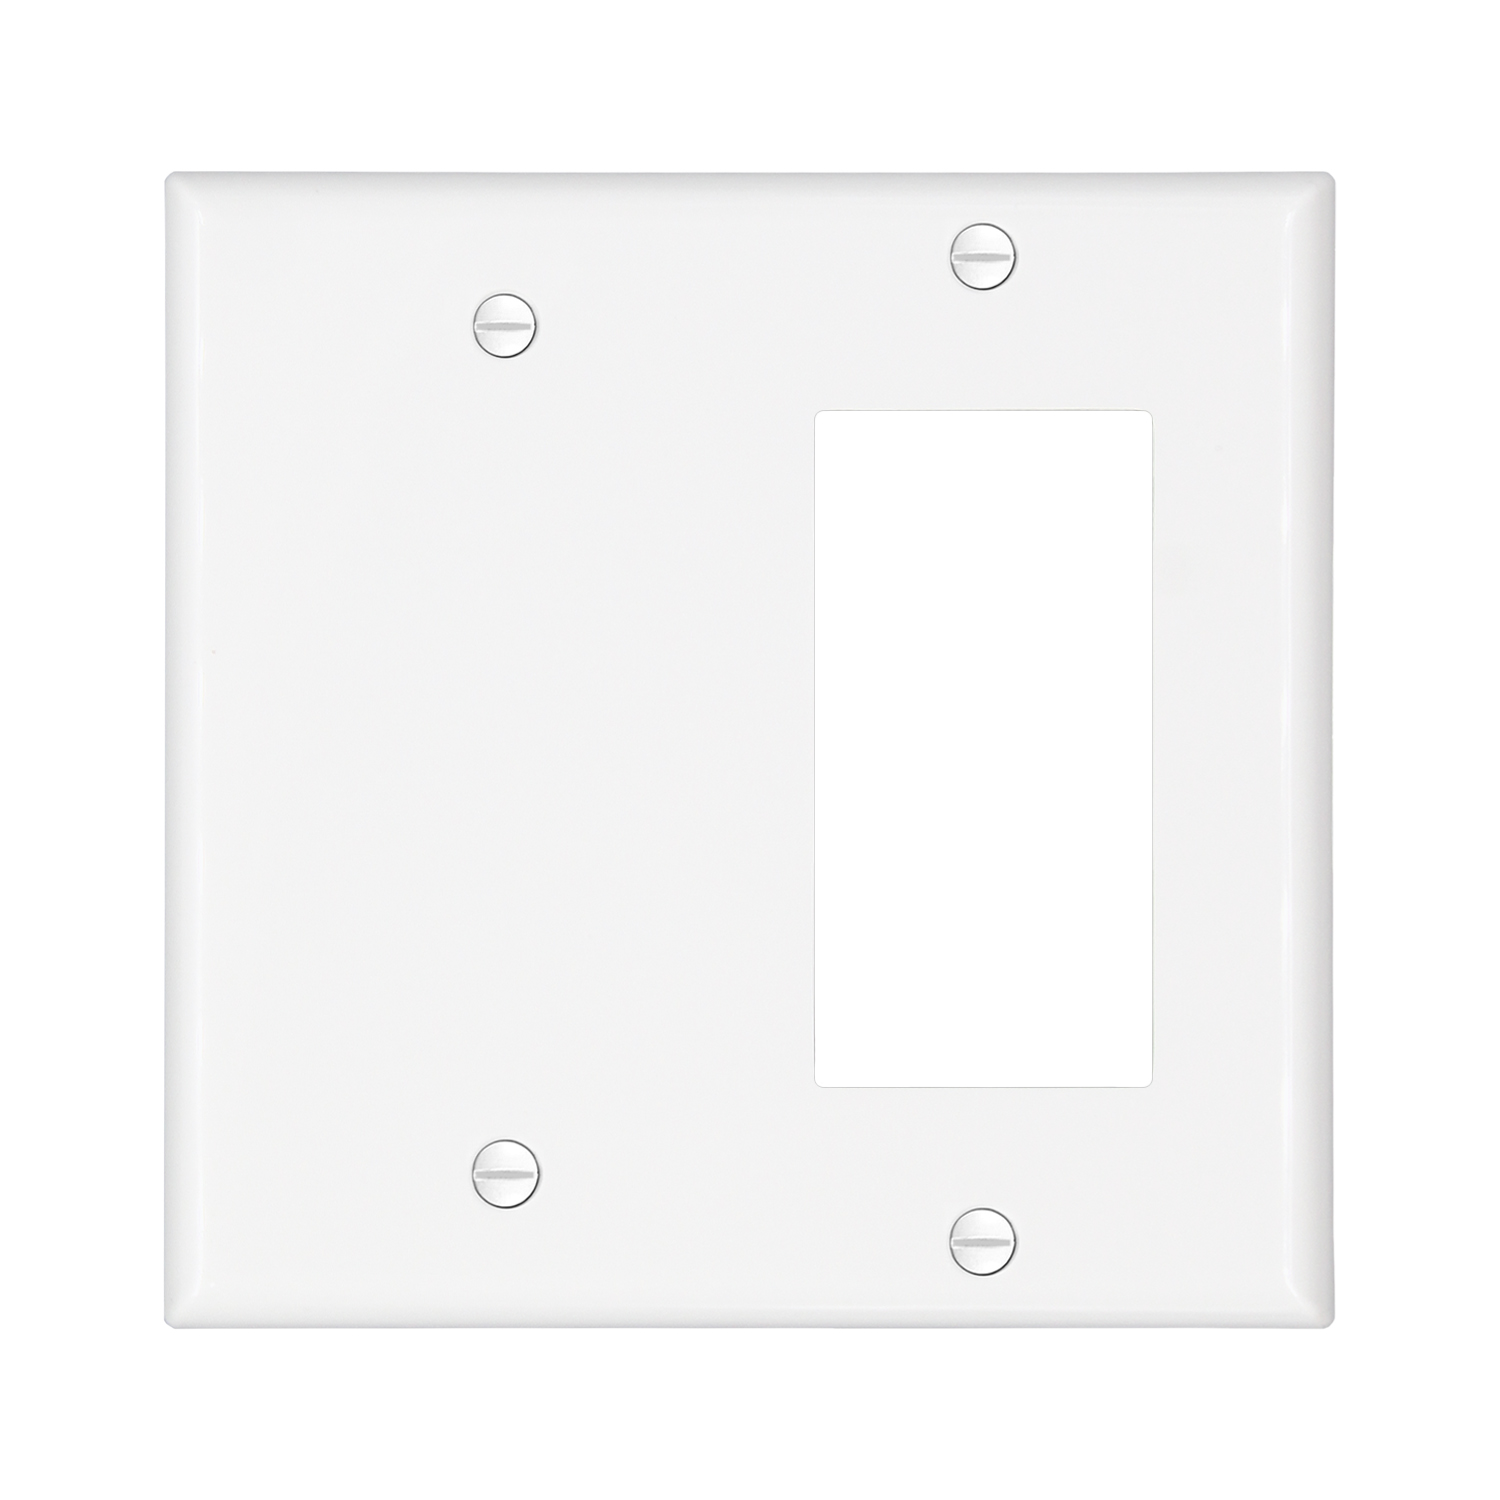 2 Gang decorative and Blank Combination Wall Plate,Standard Size, SSC-SRC